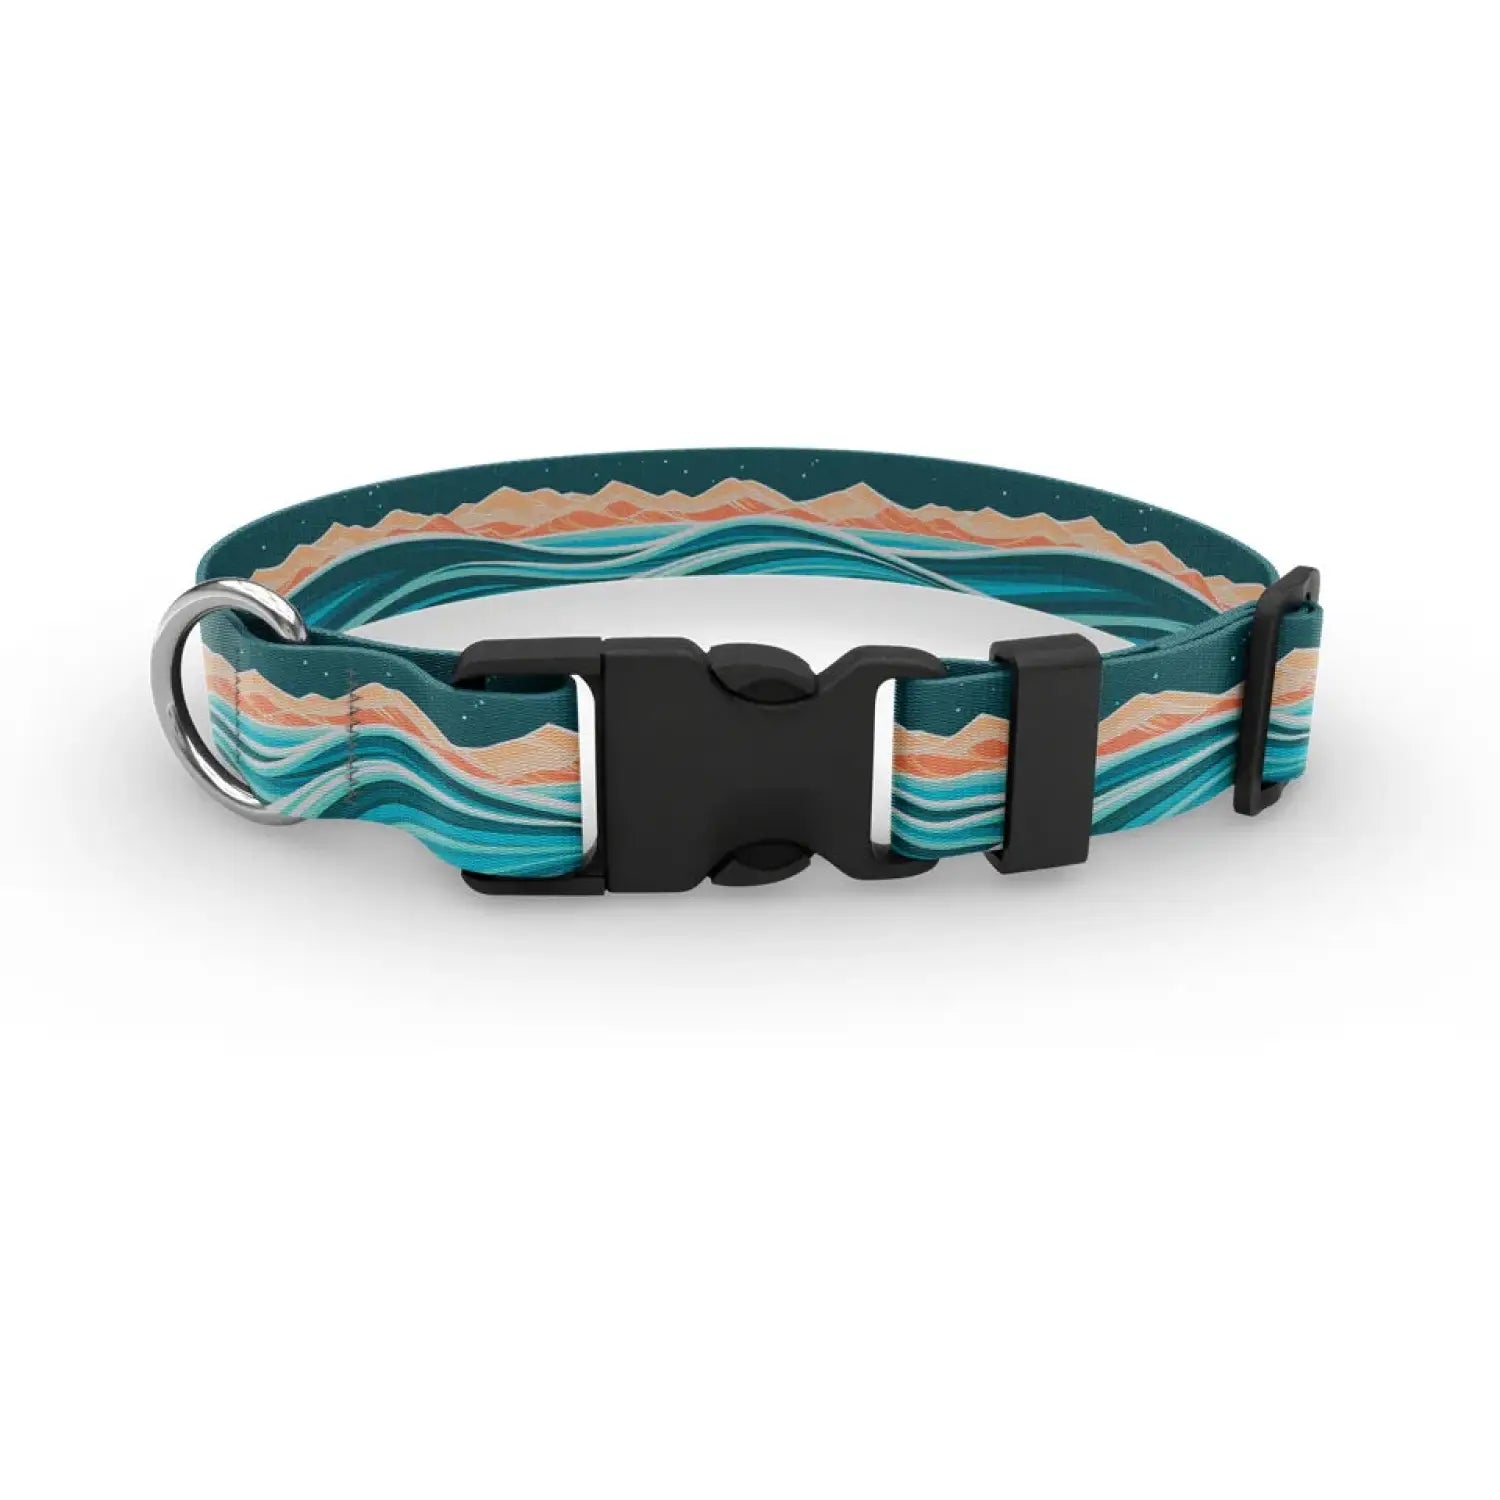 Wingo Outdoors Dog Collar in Rolling Seas design, teal cream and coral sea scape.  With black buckle and silver D ring.